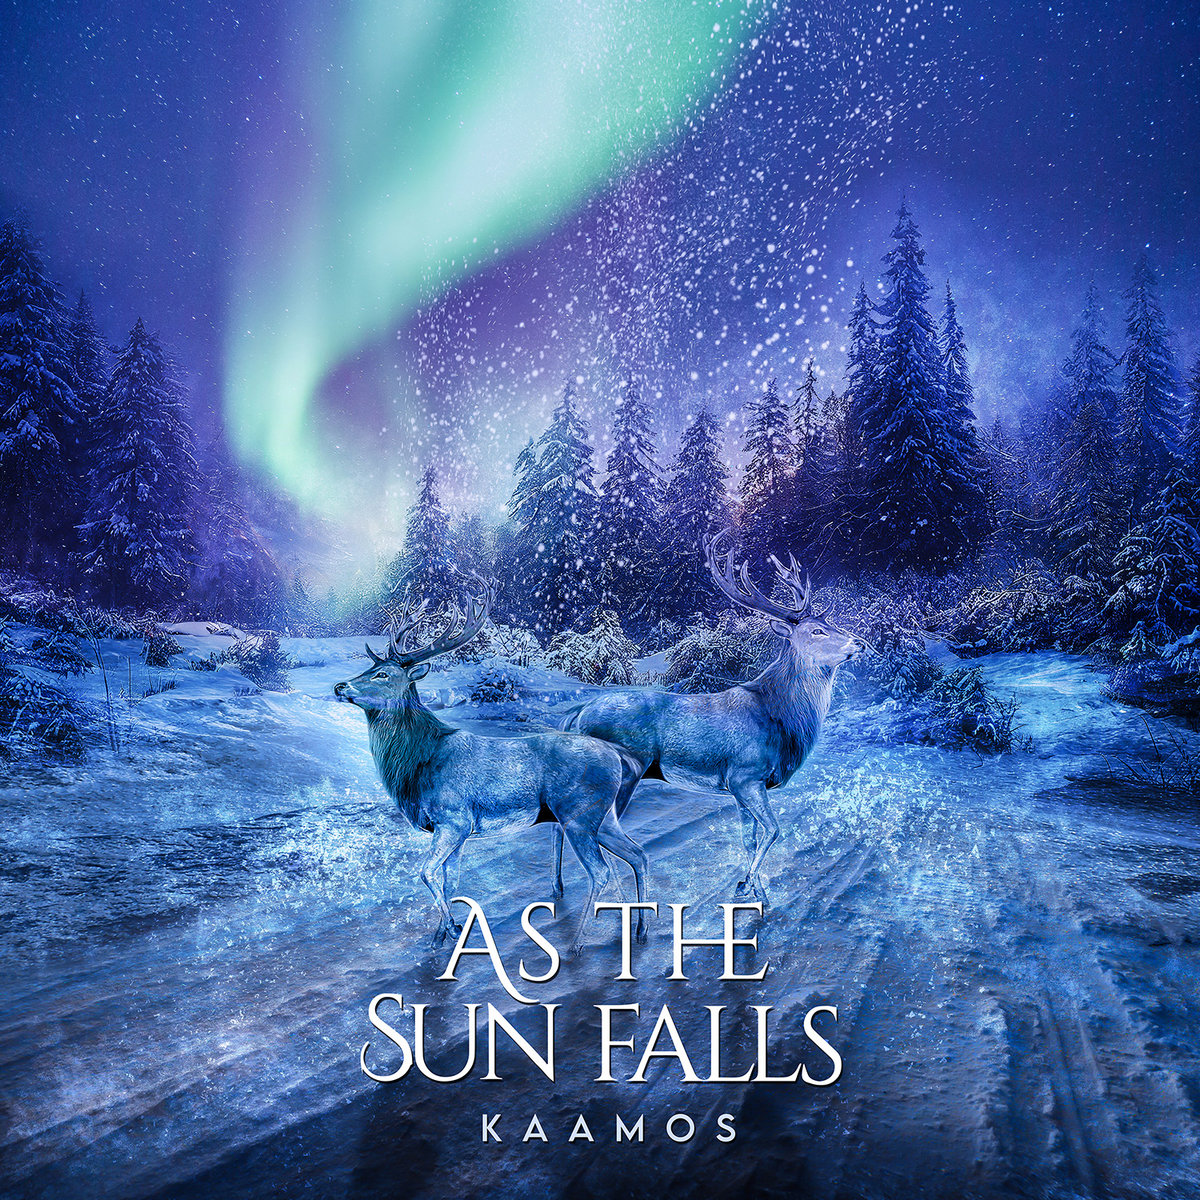 As the Sun Falls - Kaamos
Melancholic Melodic Death Metal from Finland
Release date: May 3rd, 2024 via #theogoniarecords

theogoniarecords.bandcamp.com/album/kaamos

@sun_falls #finnishdeathmetal #melodeath
#deathmetal #deathmetalband #melancholic
#melodicdeathmetal #deathmetalpromotion…